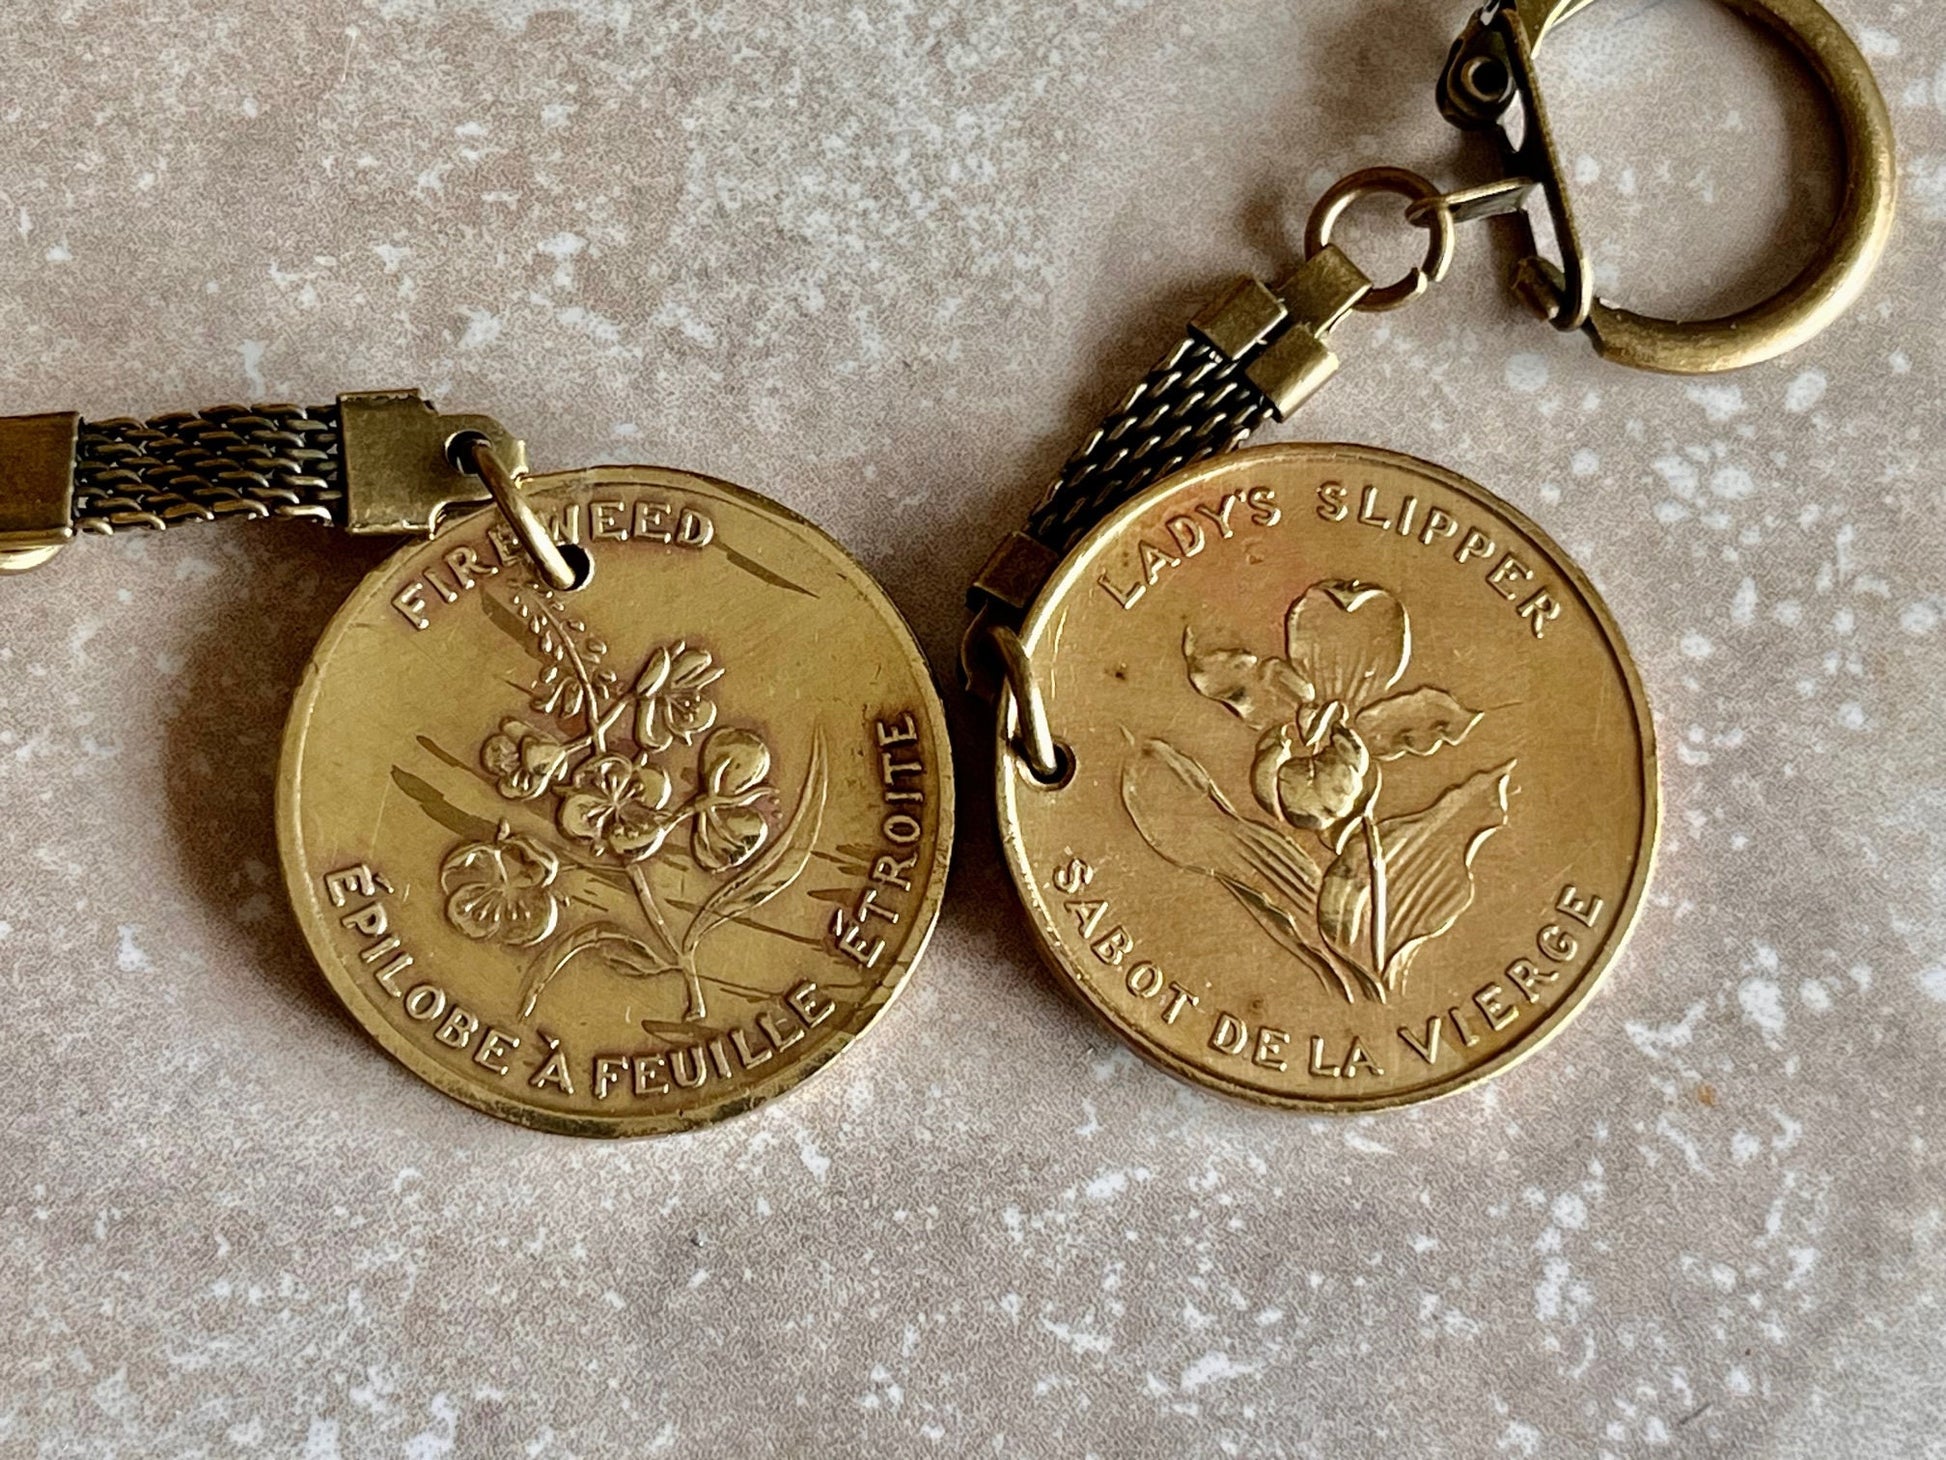 Canada Provinces Token Coin Canadian Necklace Pendant Keychain Personal Handmade Jewelry Gift Friend Charm For Him Her World Coin Collector